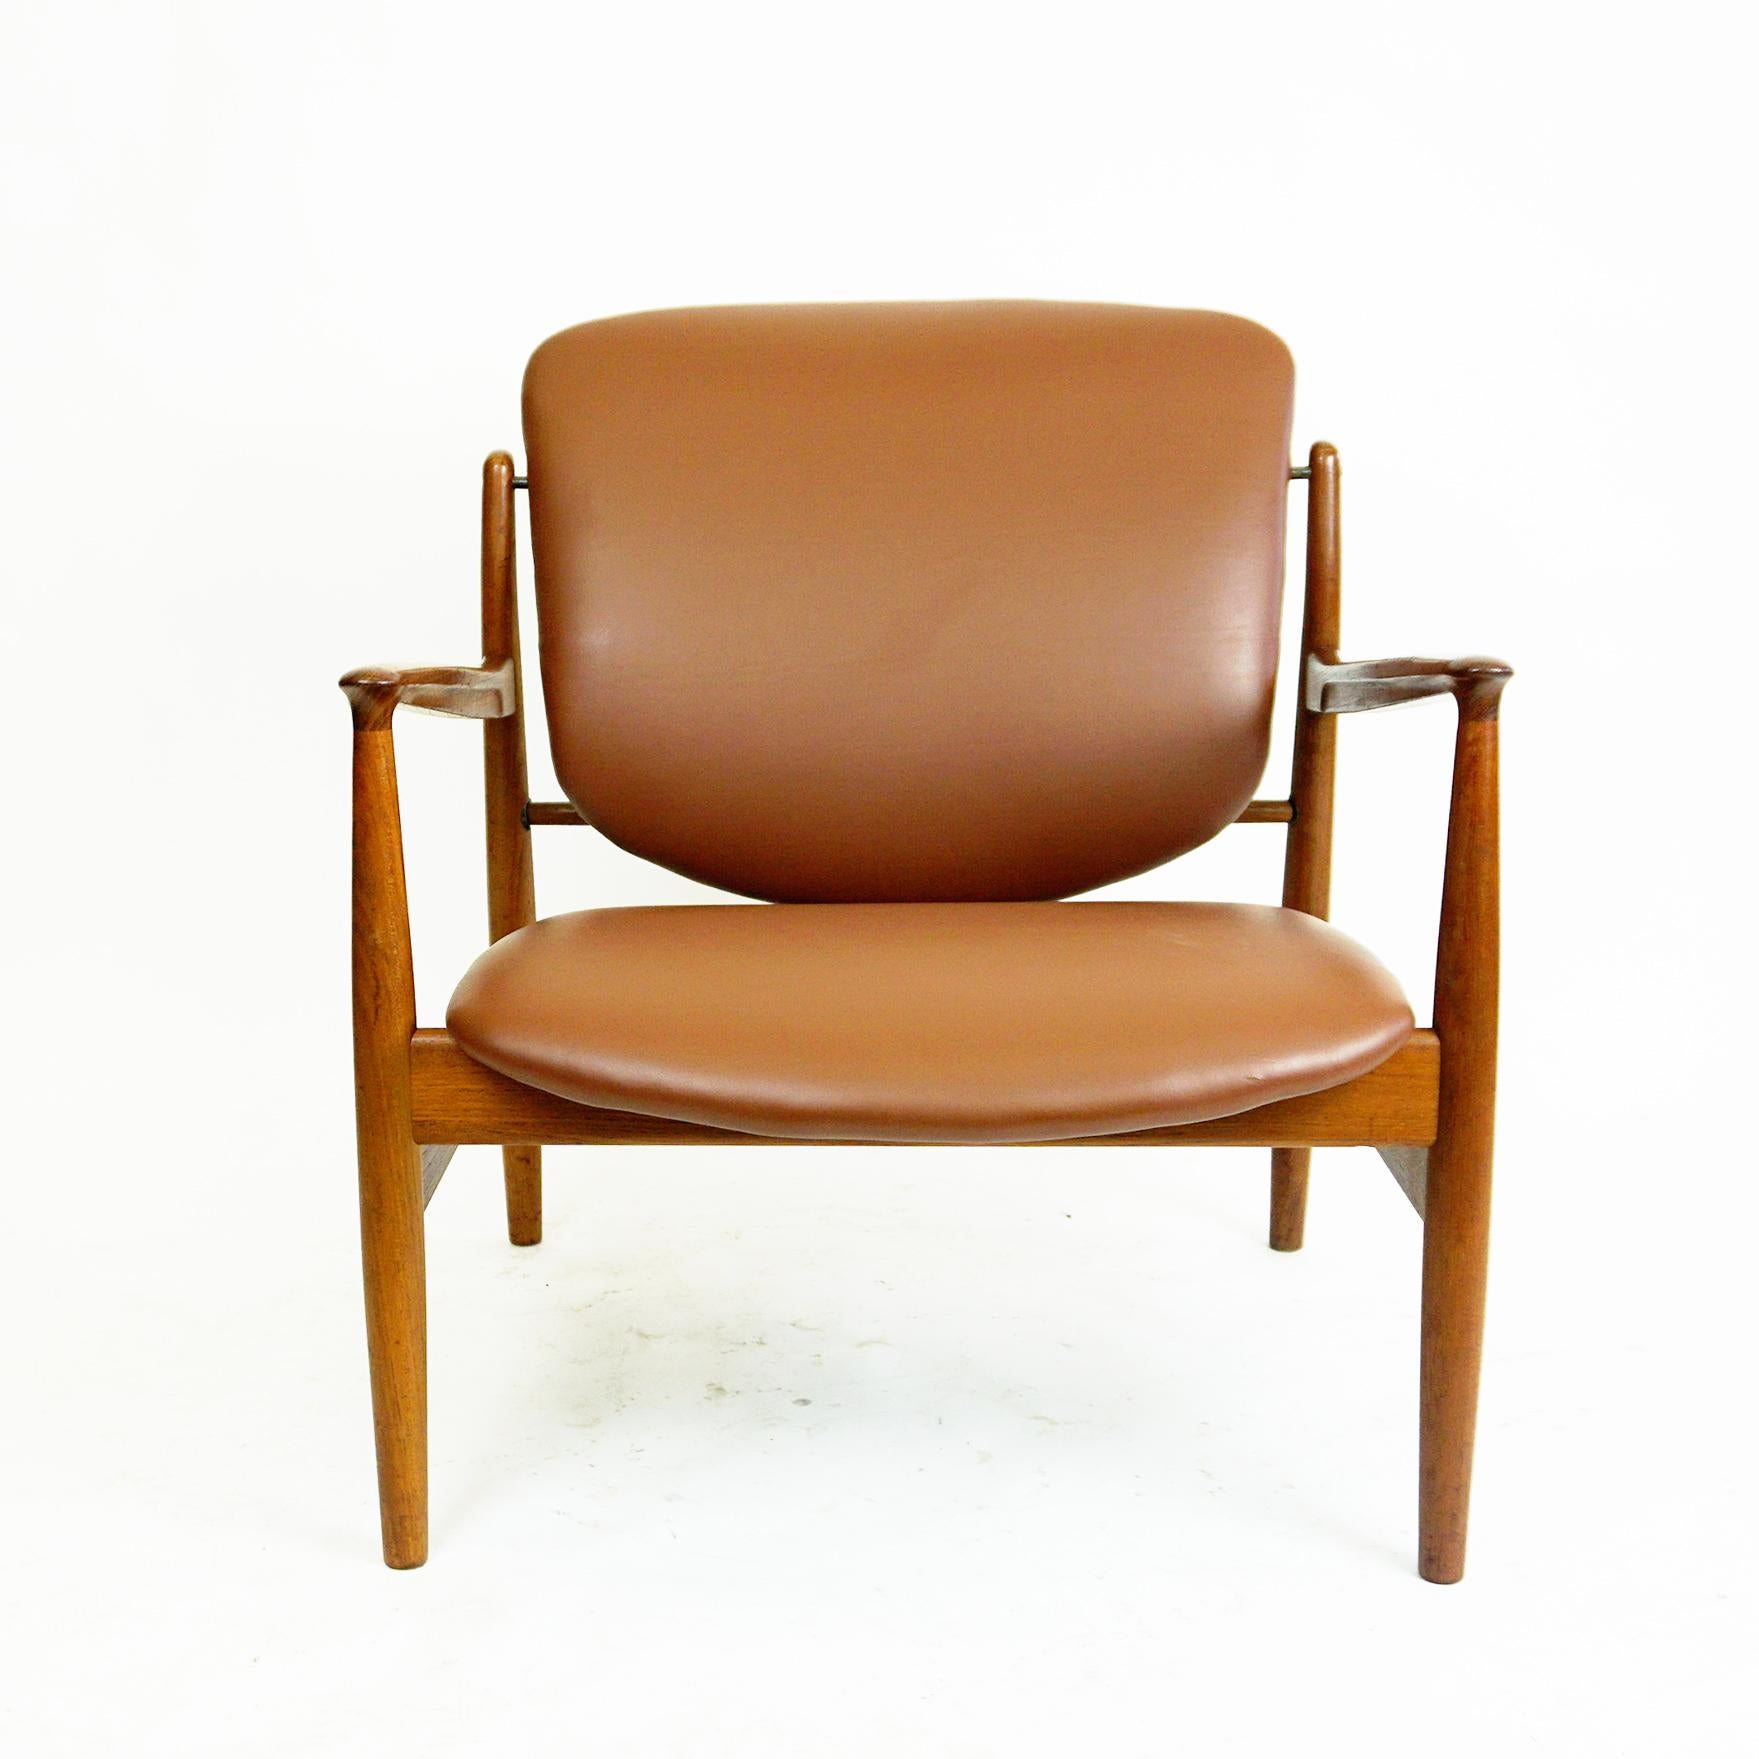 This excellent and comfortable Scandinavian Modern lounge chair model number FD 136 was designed by Finn Juhl for France & Son, Denmark 1960s.
It feature a curved backrest and and seat that appears to float. Wonderful organic shaped armrests and